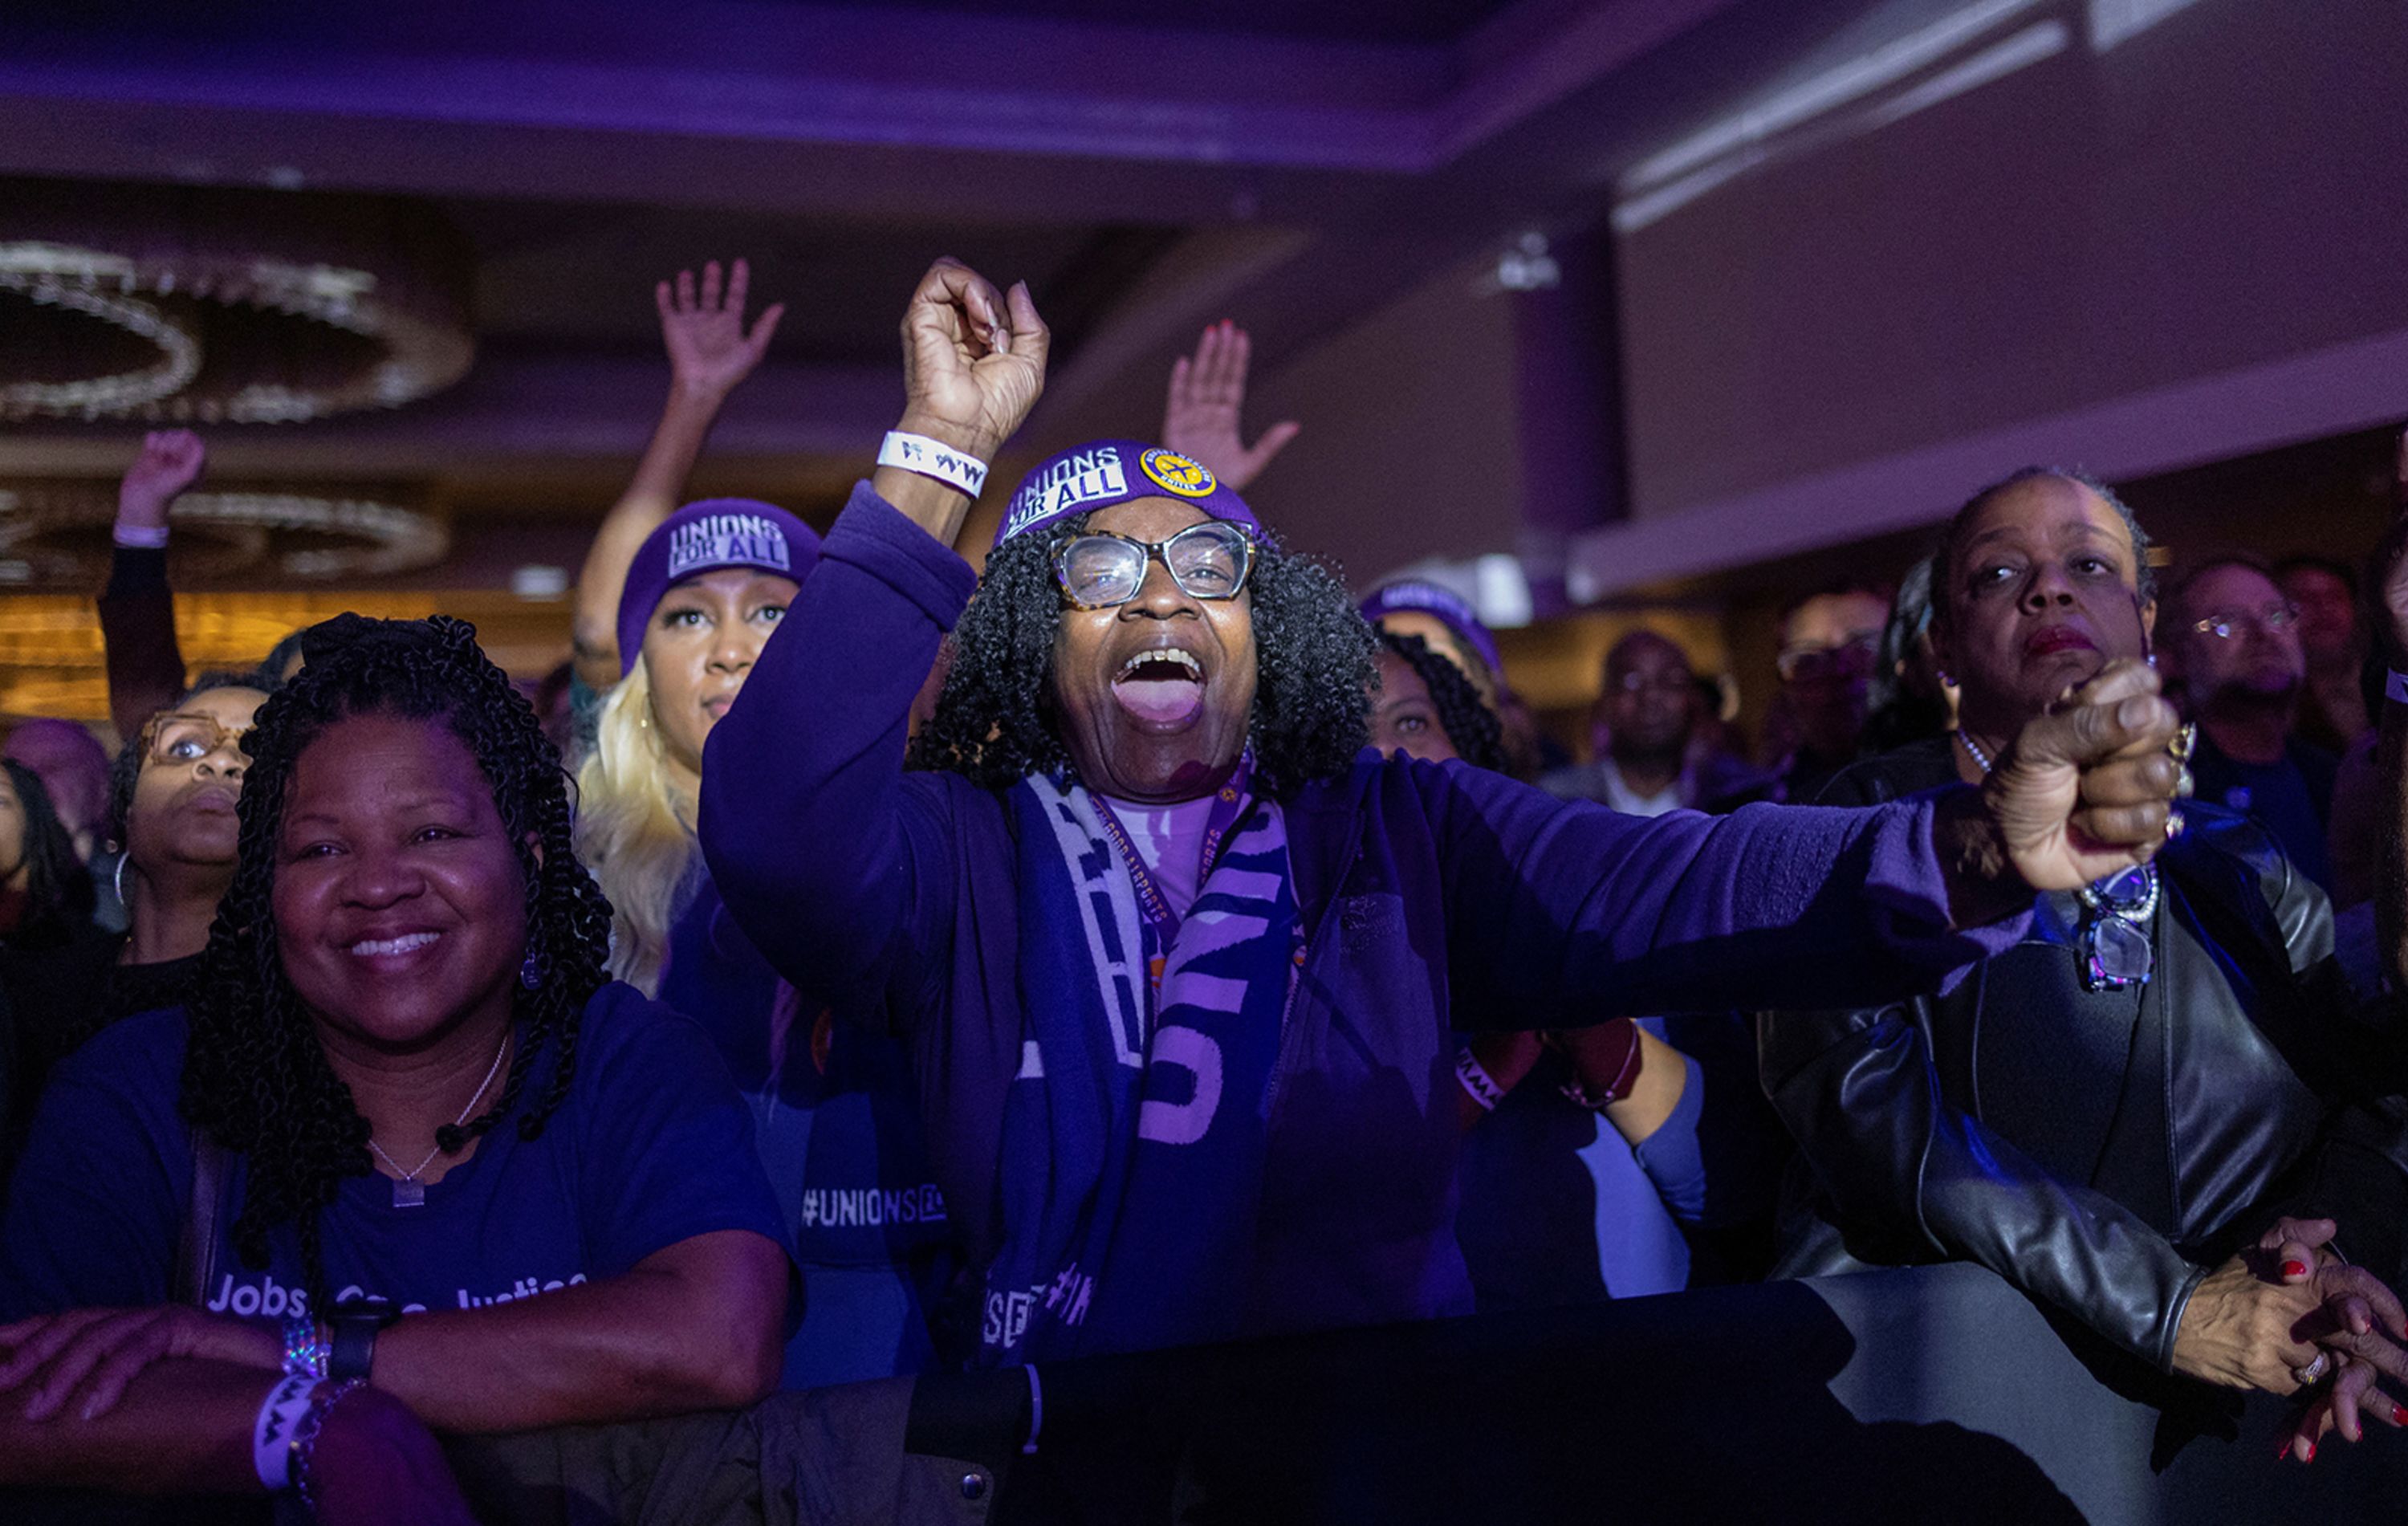 Supporters of US Sen. Raphael Warnock react during his election night party in Atlanta on Tuesday, December 6. Warnock will win Georgia's runoff election, CNN projects, defeating Republican challenger Herschel Walker.